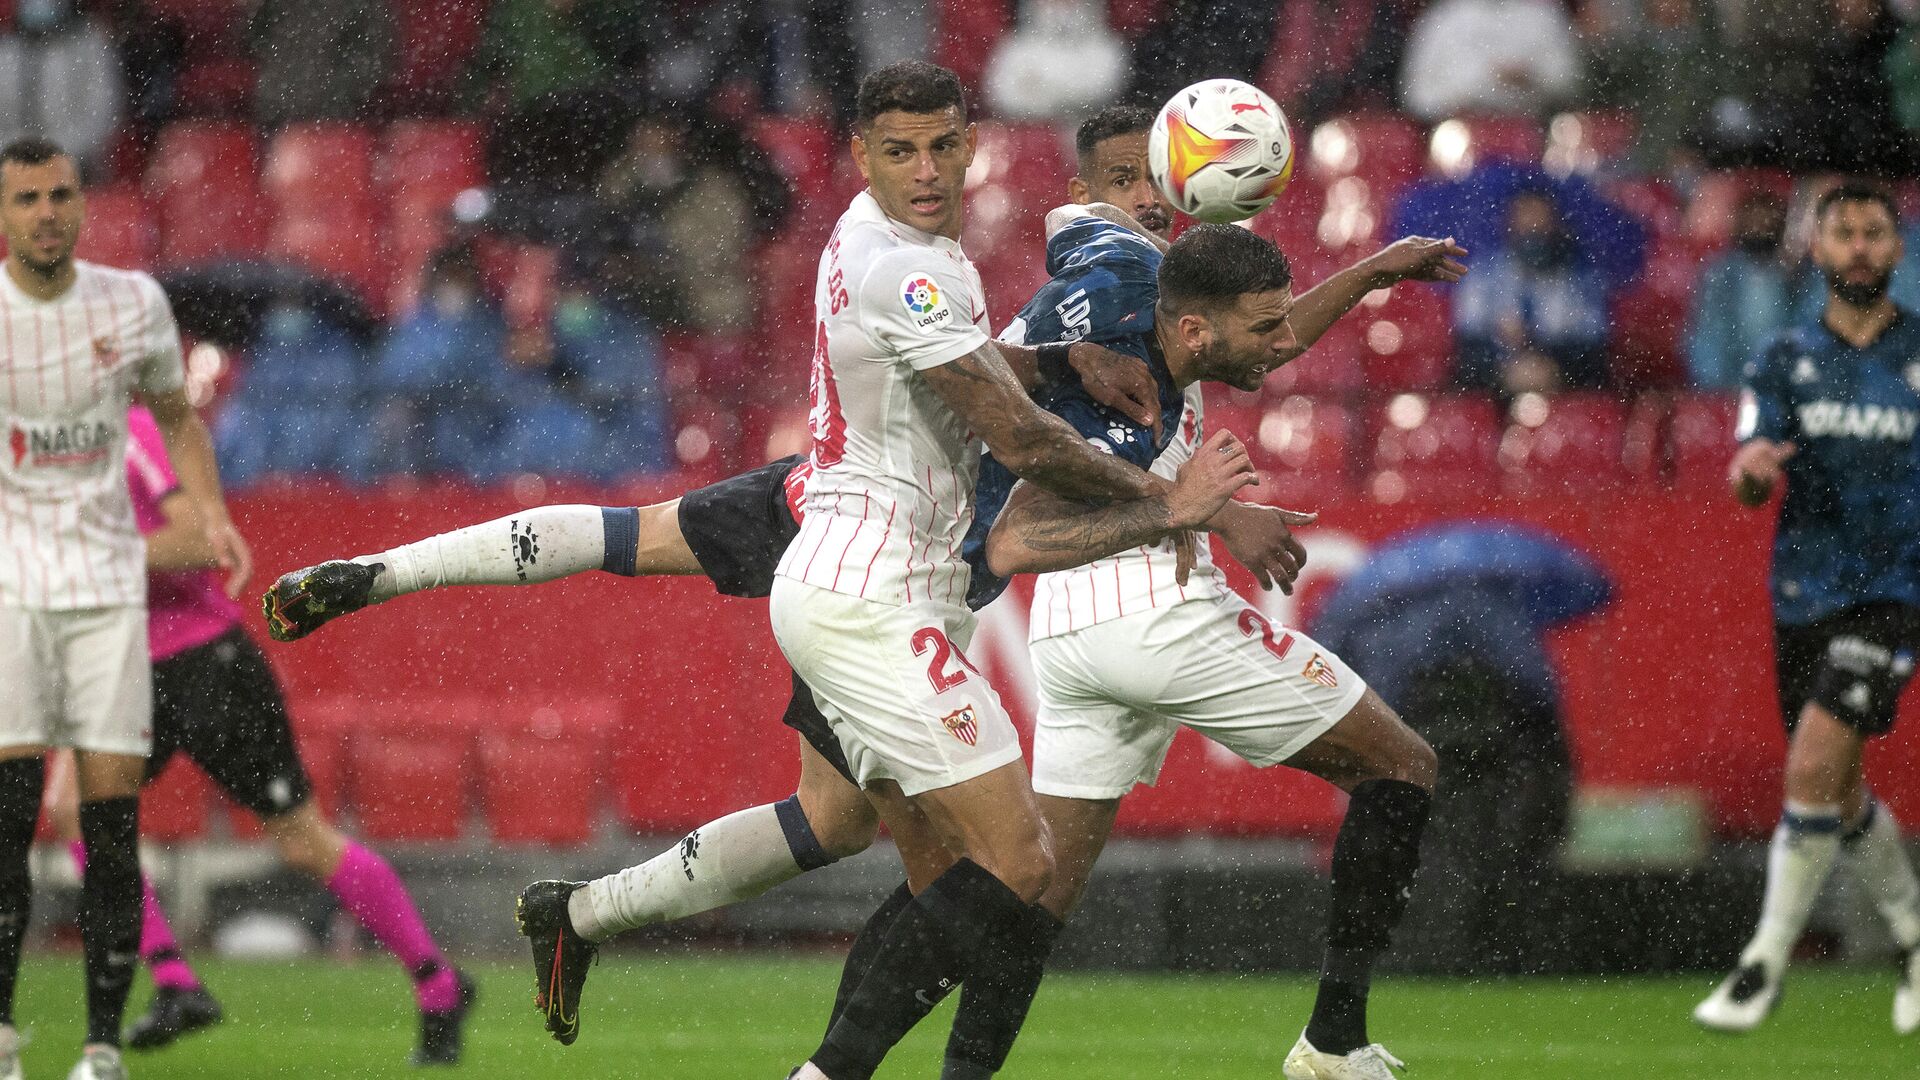 Sevilla's Brazilian defender Diego Carlos (L) fights for the ball with Alaves' Spanish midfielder Edgar Mendez during the Spanish league football match between Sevilla FC and Deportivo Alaves at the Ramon Sanchez Pizjuan stadium in Seville on November 20, 2021. (Photo by JORGE GUERRERO / AFP) - РИА Новости, 1920, 20.11.2021